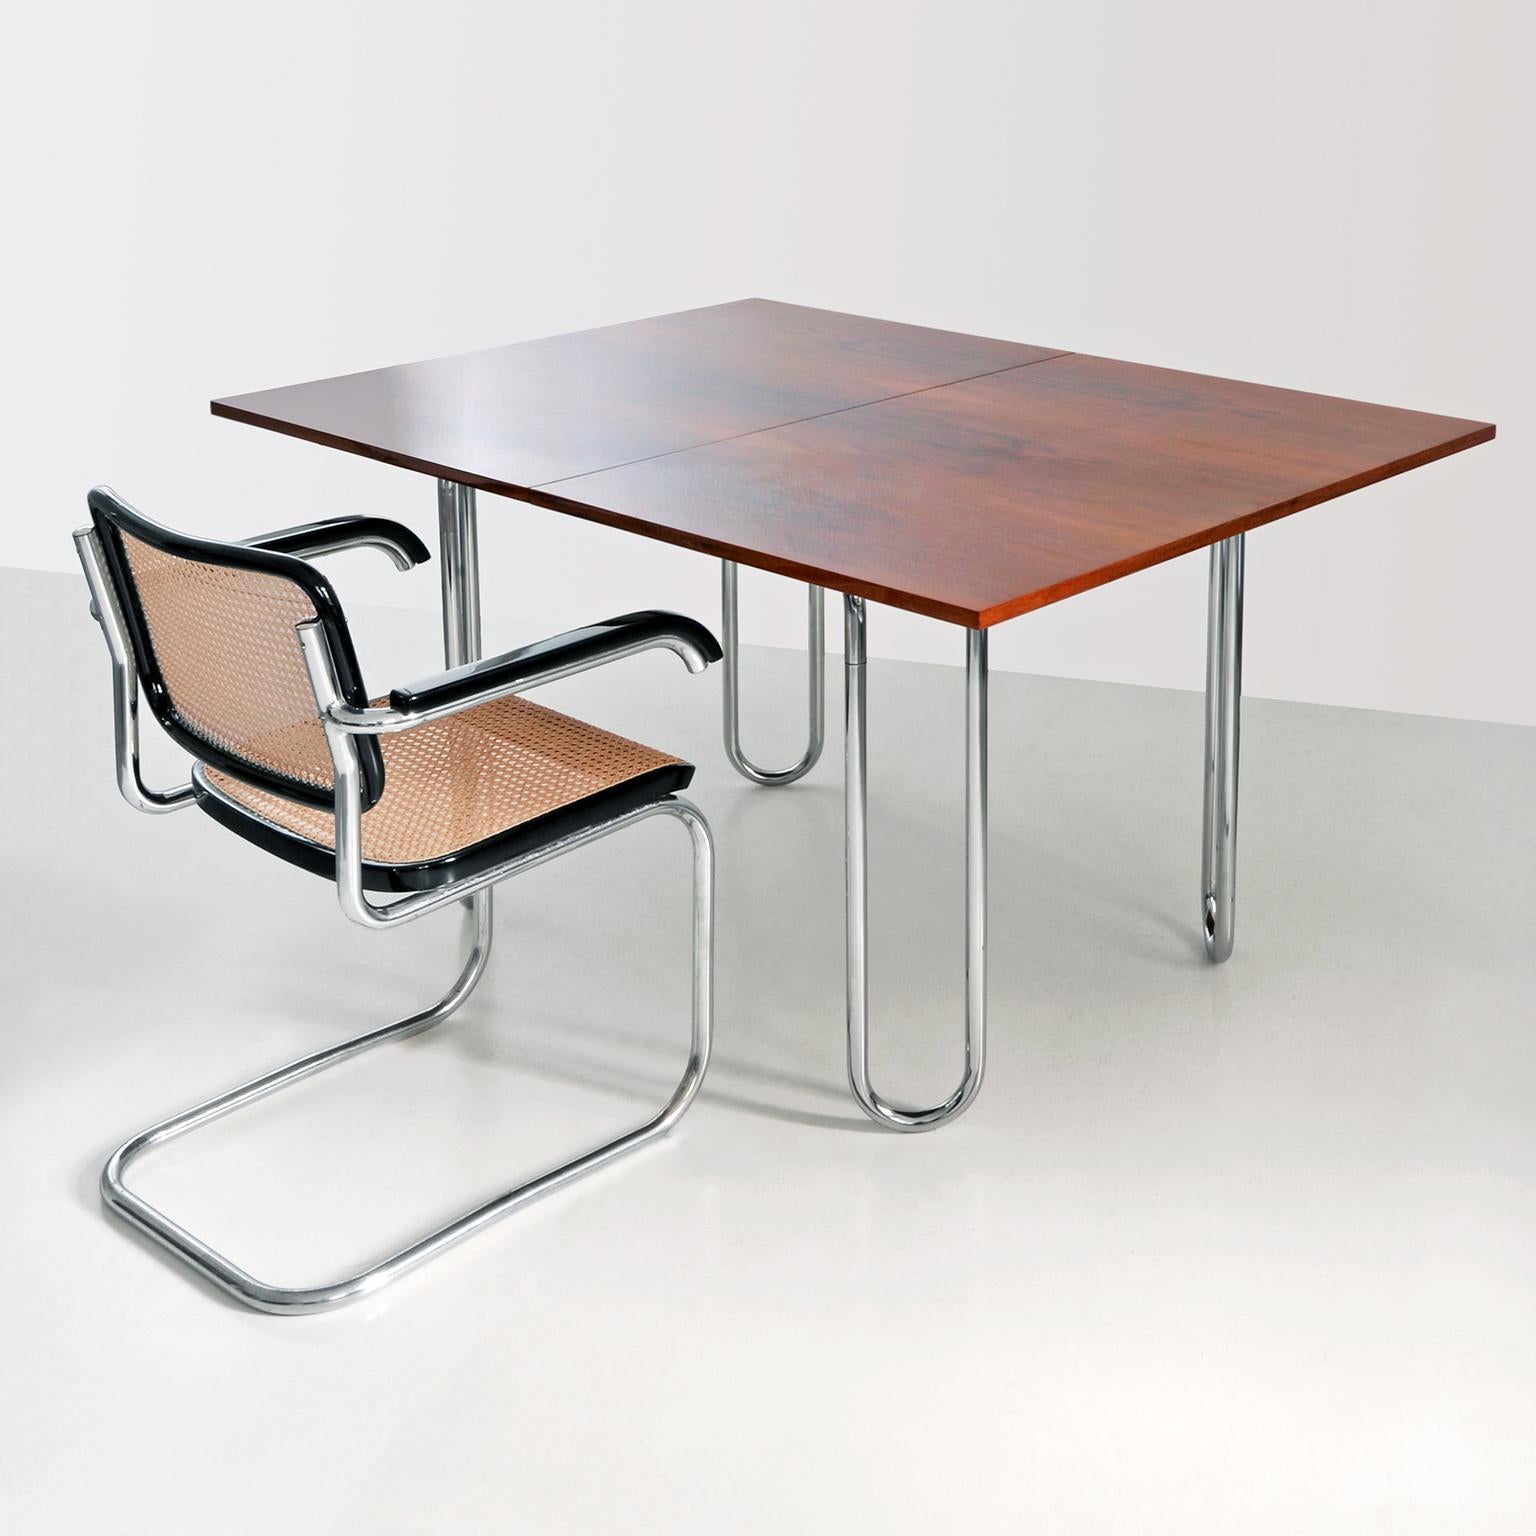 Contemporary Modernist Folding Table, Chrome Plated Steel, Veneered Wood, Made-To-Measure For Sale